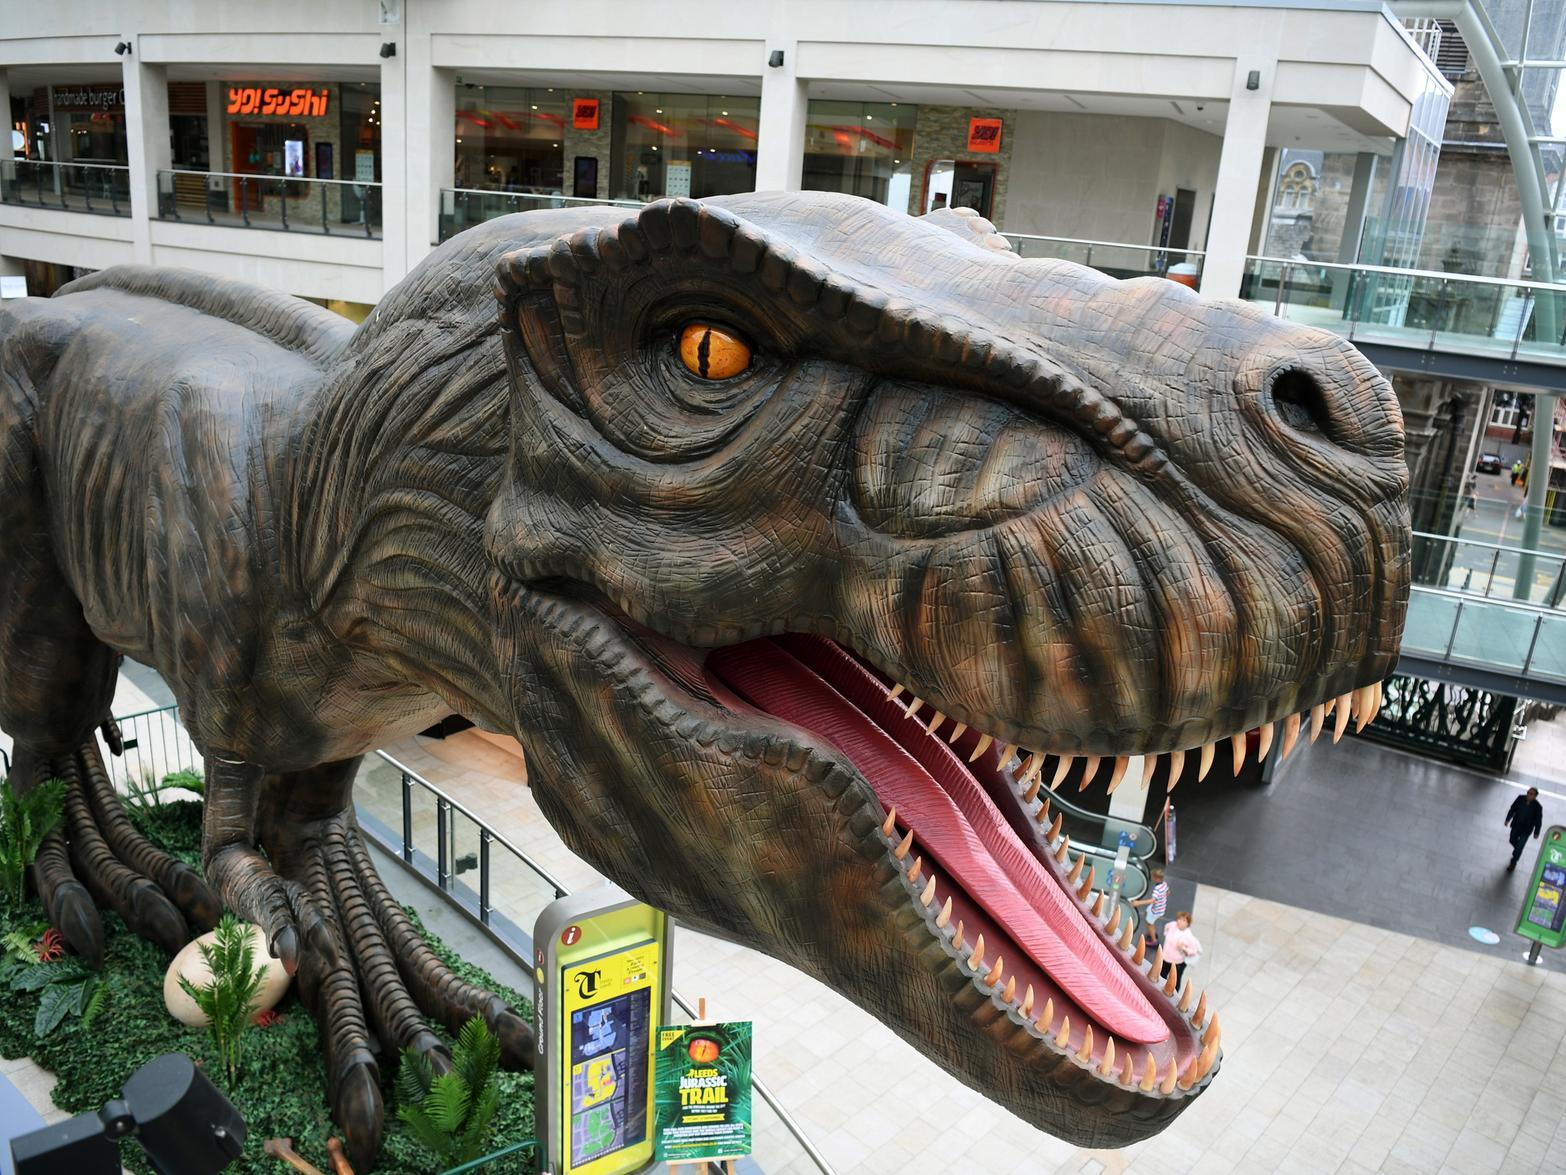 The UKs first ever city centre animatronic dinosaur trail roared into life in Leeds. Giant dinosaurs took up residence across the city centre as part of the Leeds Jurassic Trail - a free event running during the summer holiday.